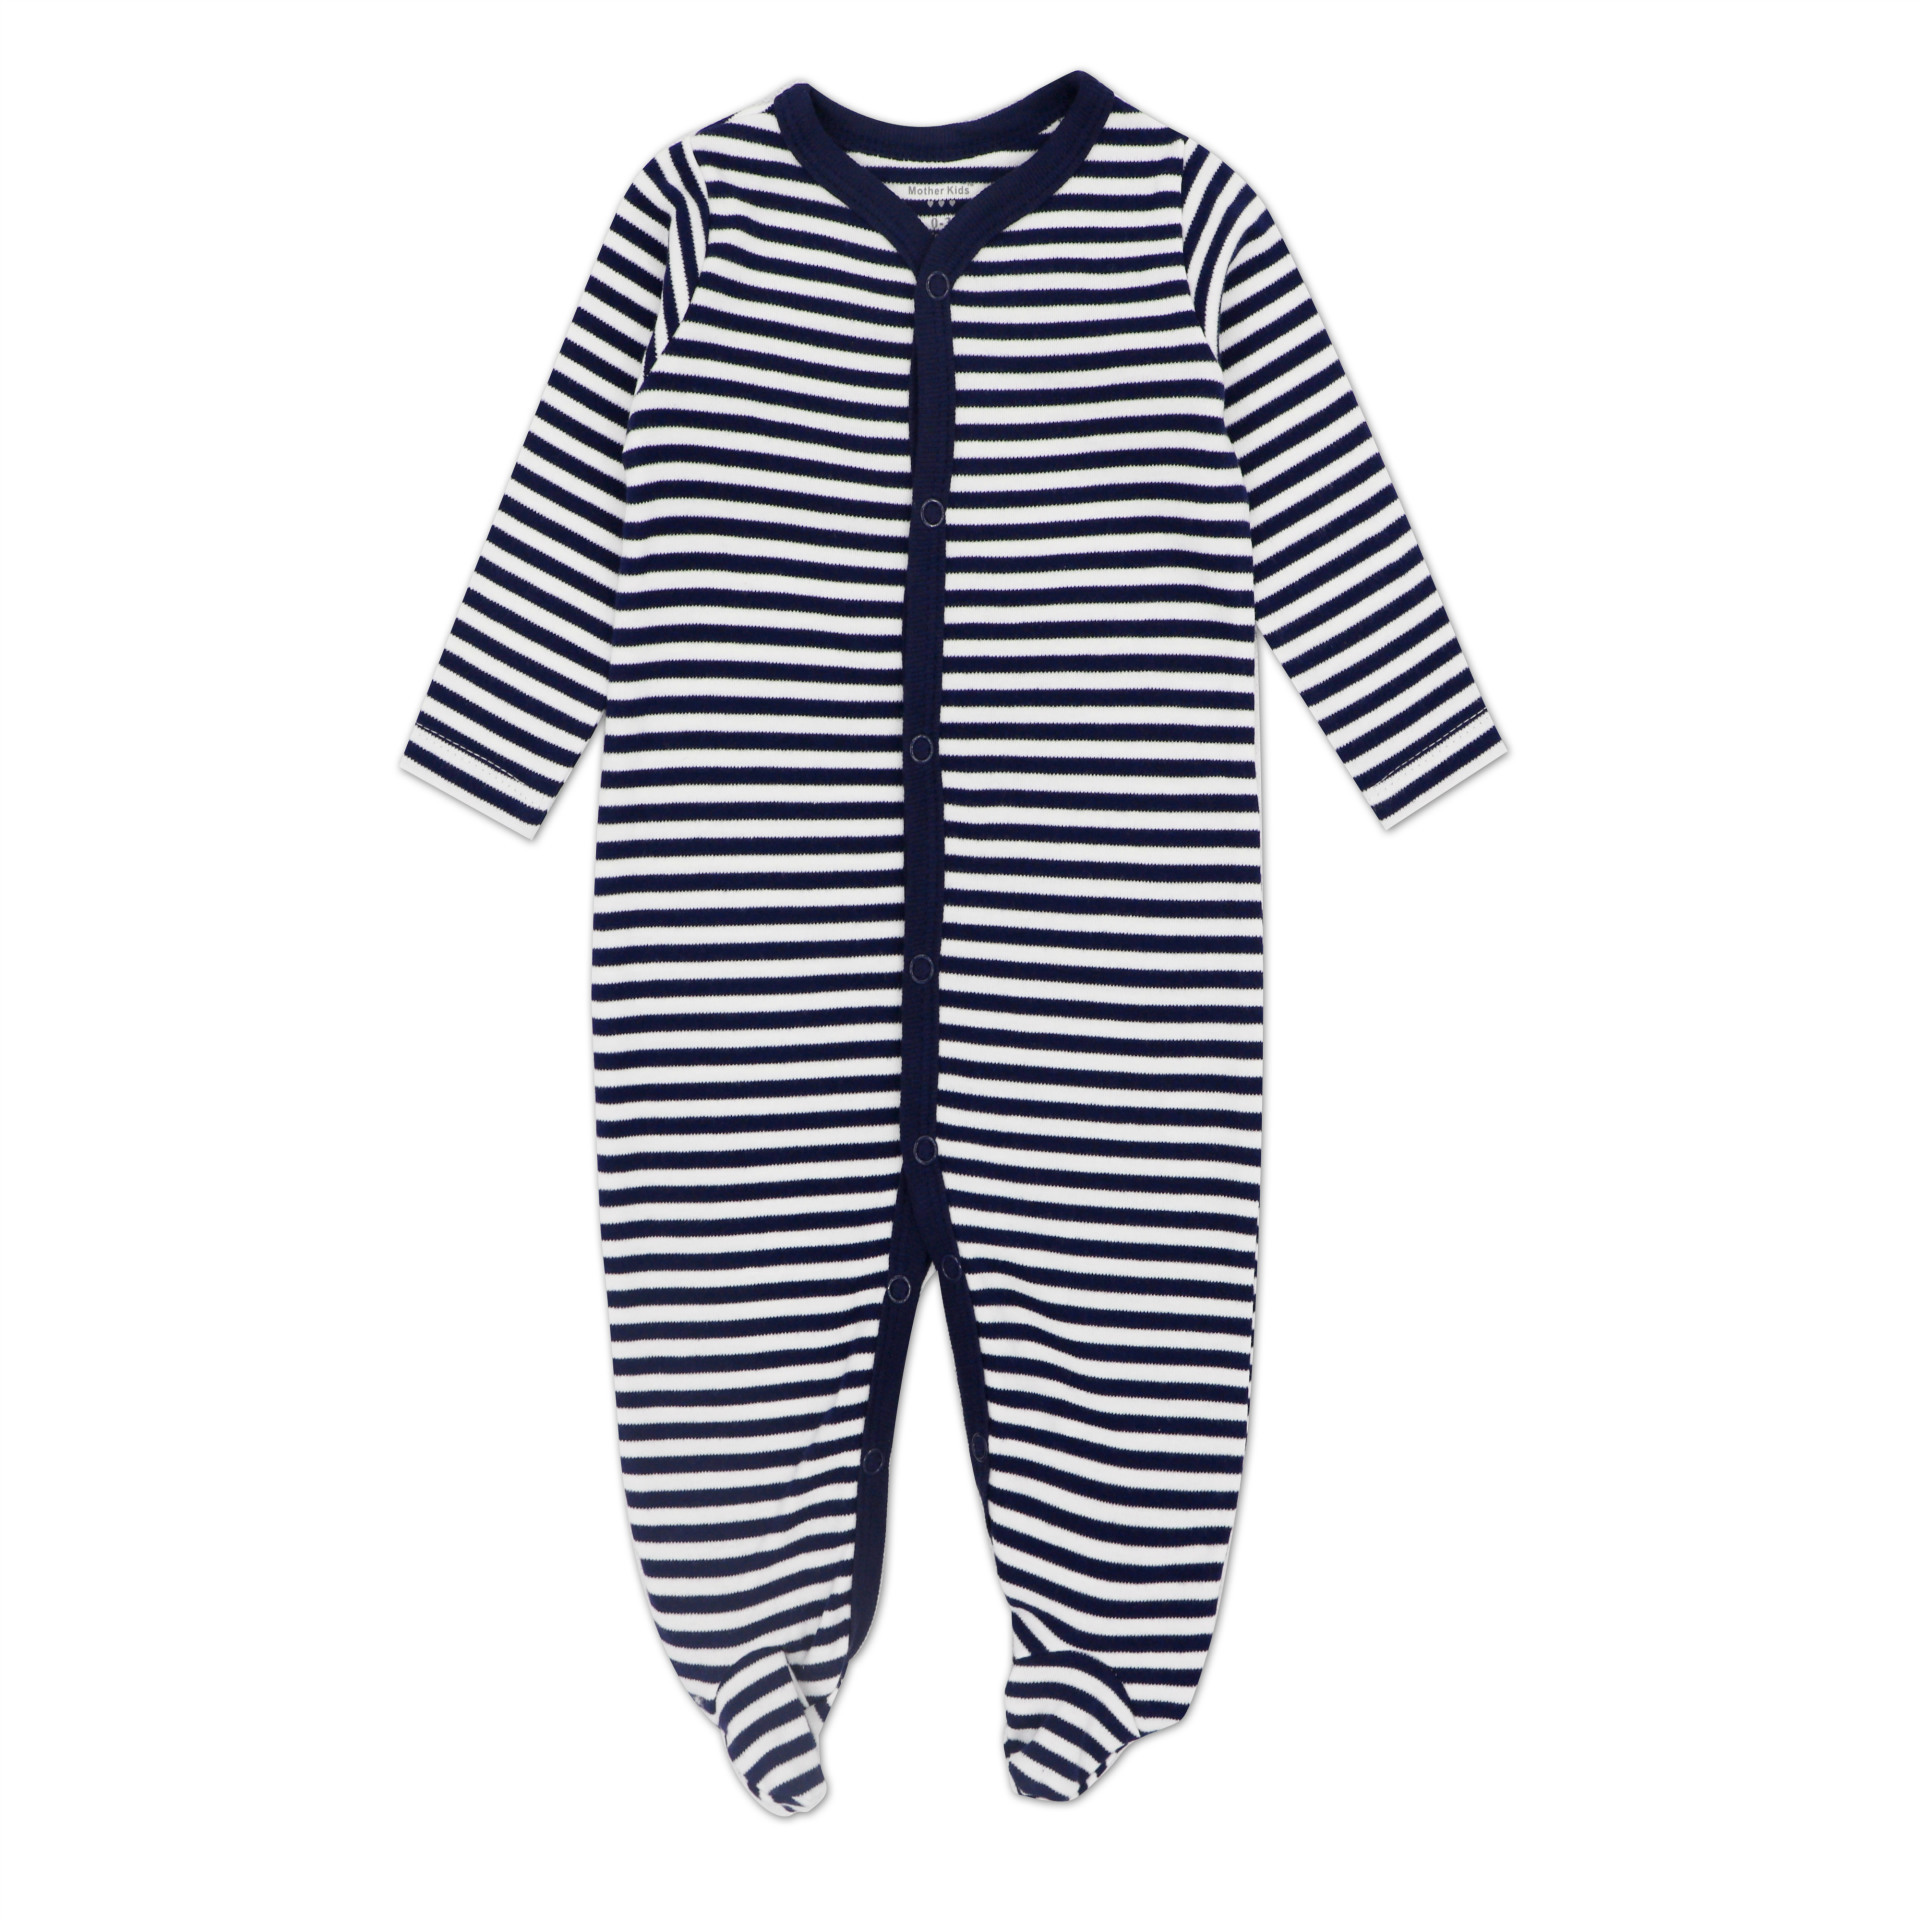 Baby Navy Stripes Footed Pajamas Sleepwear Cotton Infant One-piece（0-1Year）